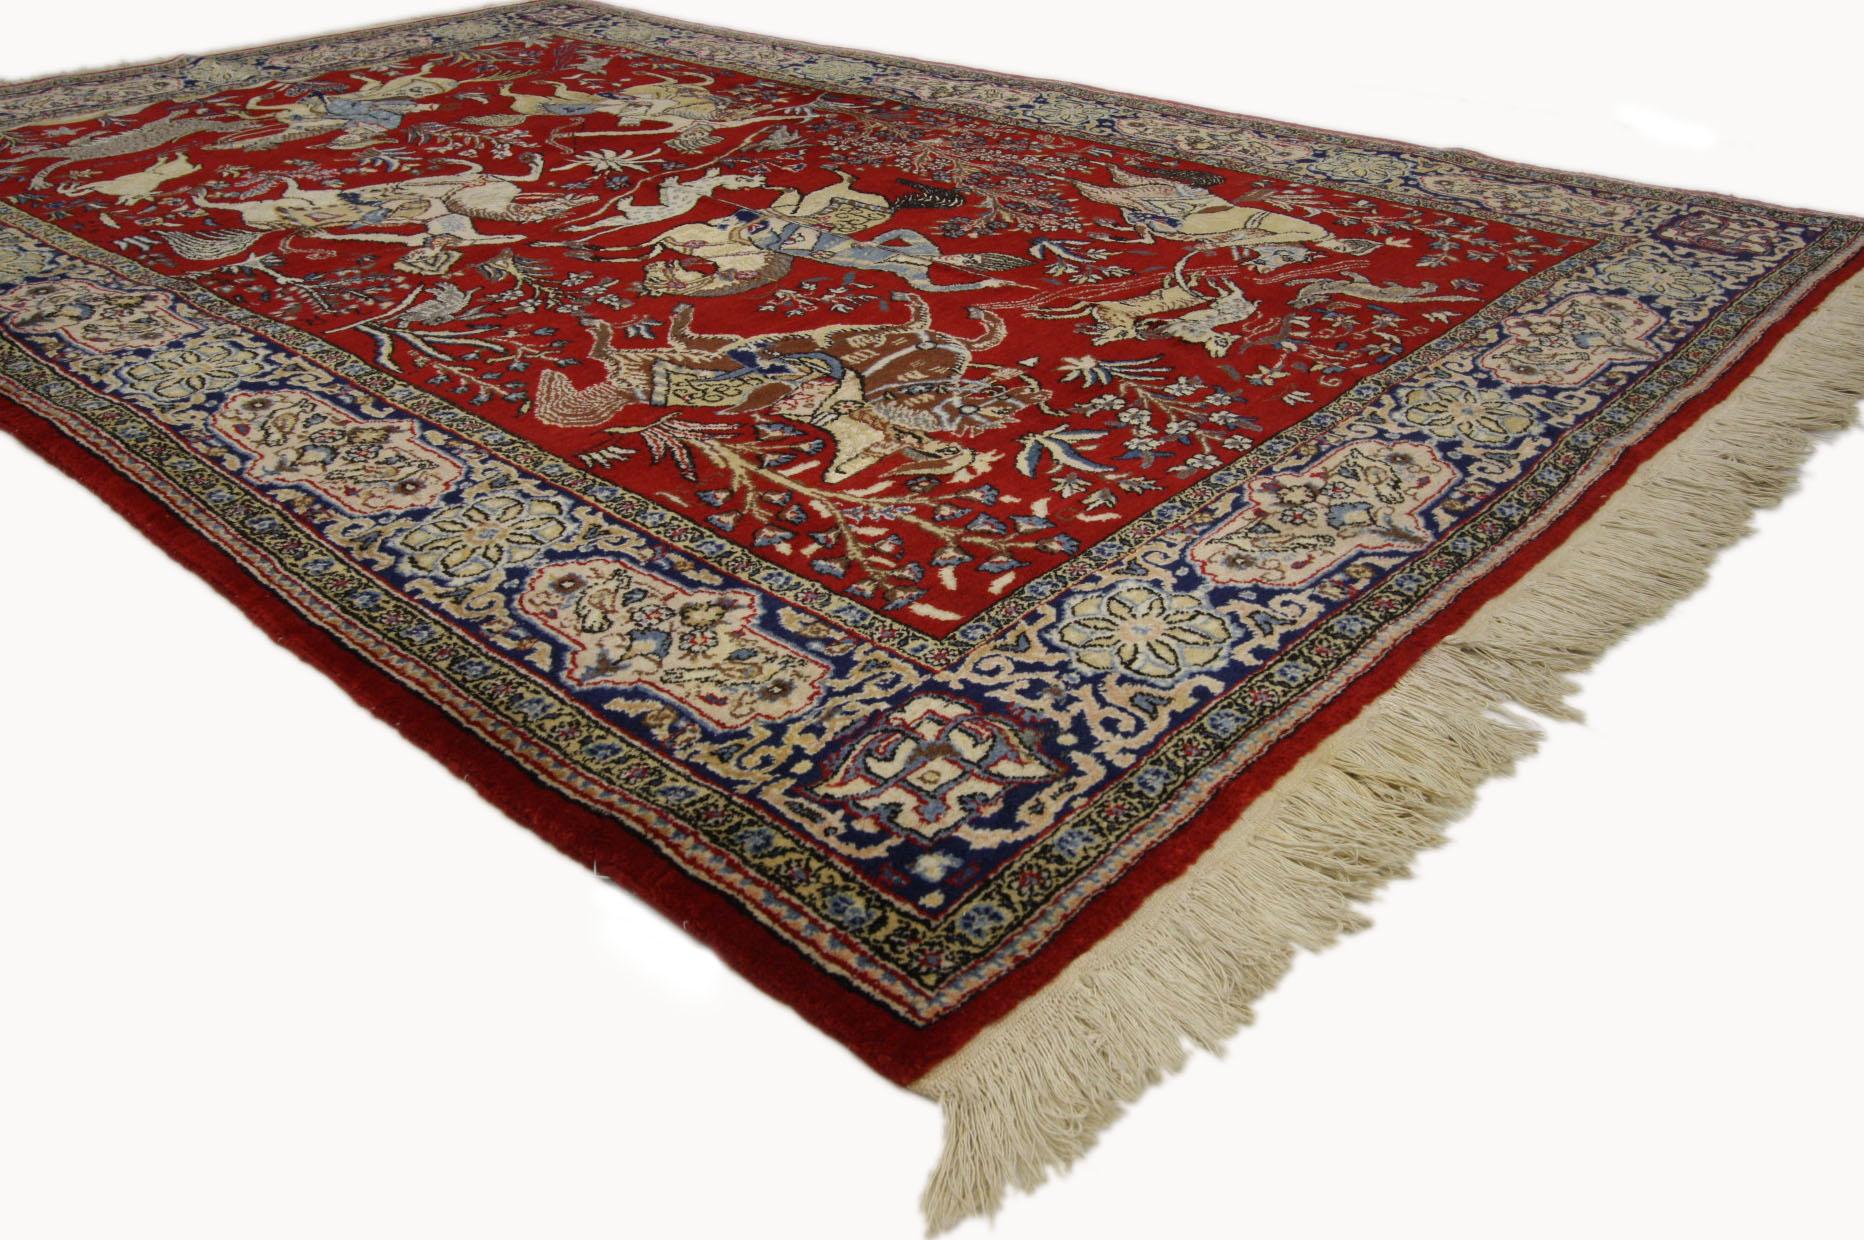 74209 Vintage Persian Qum Pictorial Rug, Medieval Style Tapestry, Hunting Carpet. This hand knotted wool vintage Persian Qum rug features a medieval style depicting a lively pictorial hunting scene against a ruby red backdrop. The sense of flight is